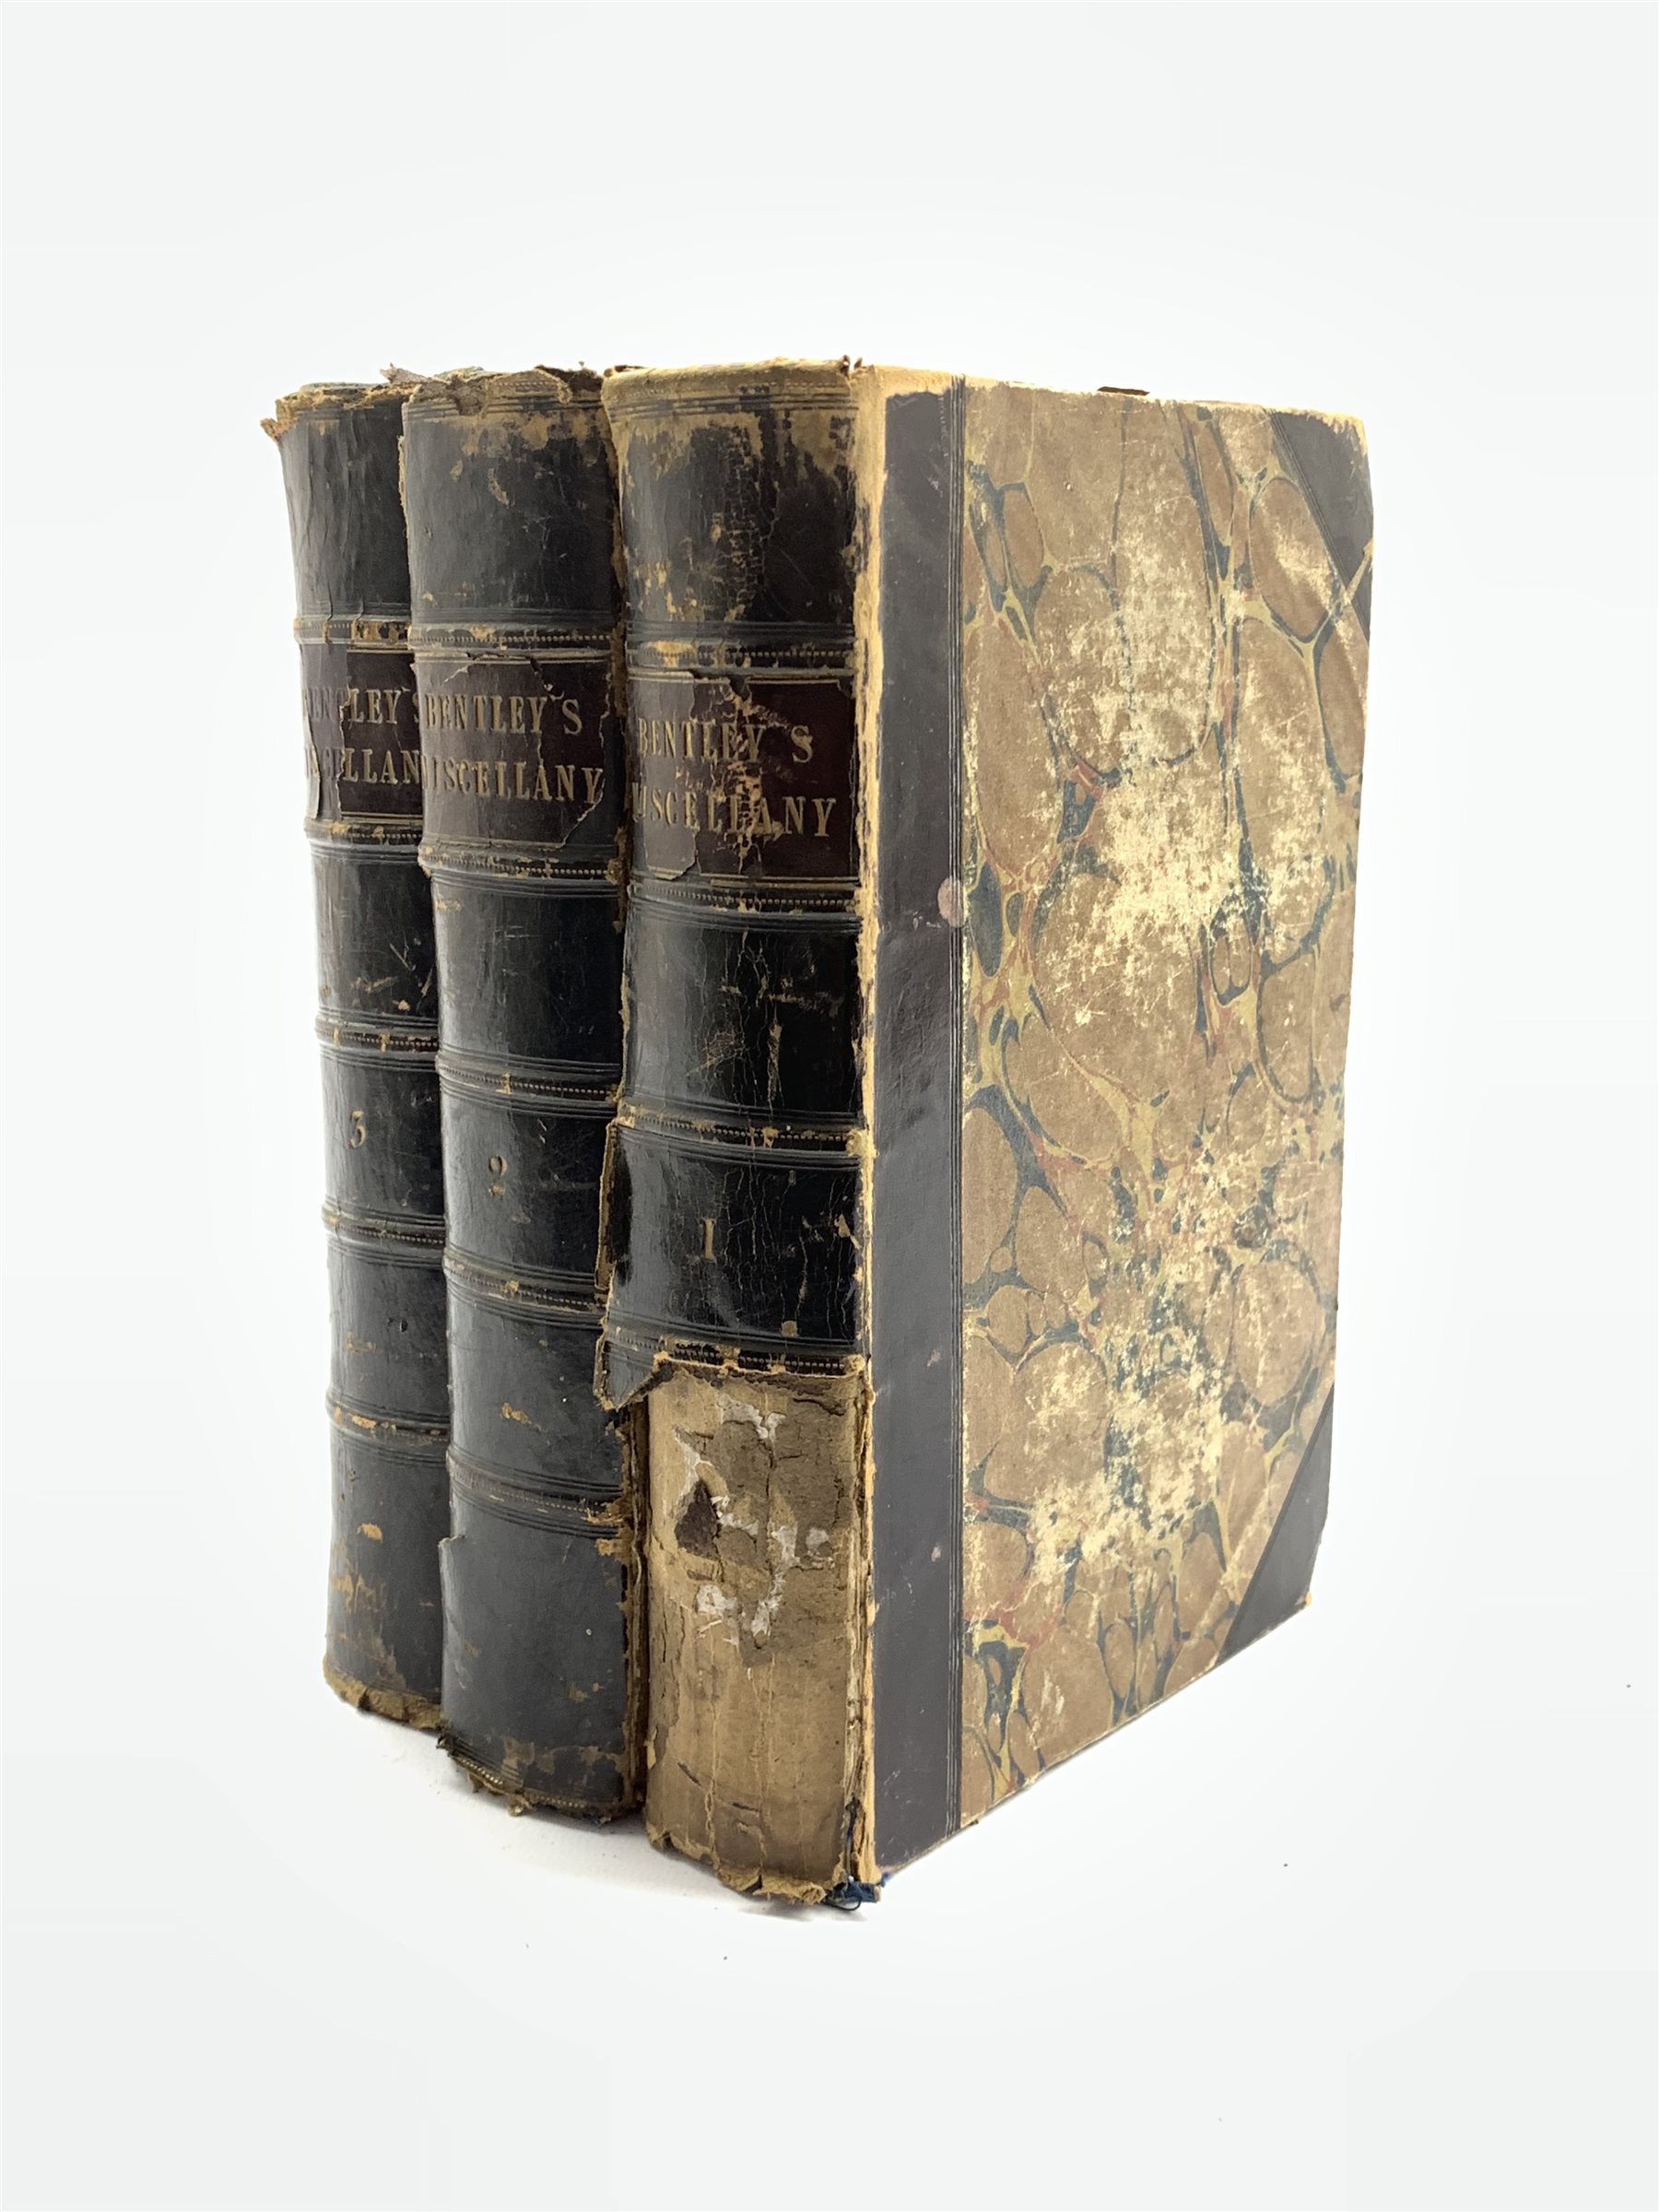 Bentley (Richard) 'Bentley's Miscellany' 3 vols published 1837-8 in marbled boards and leather spin